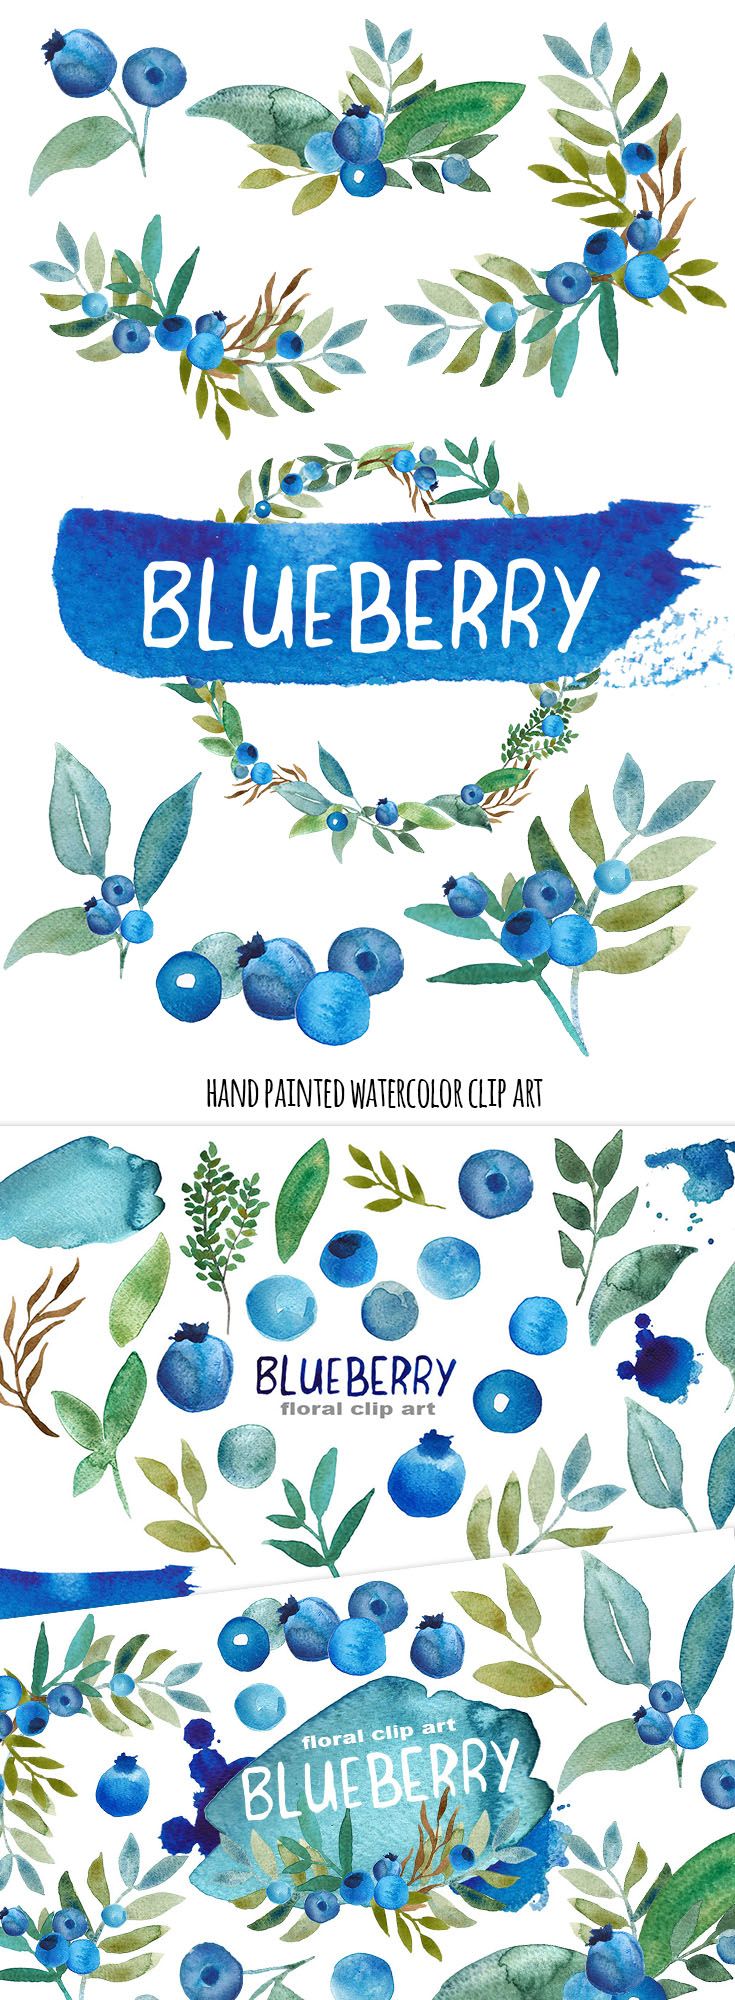 Blueberry clipart watercolor. Clip art hand painted